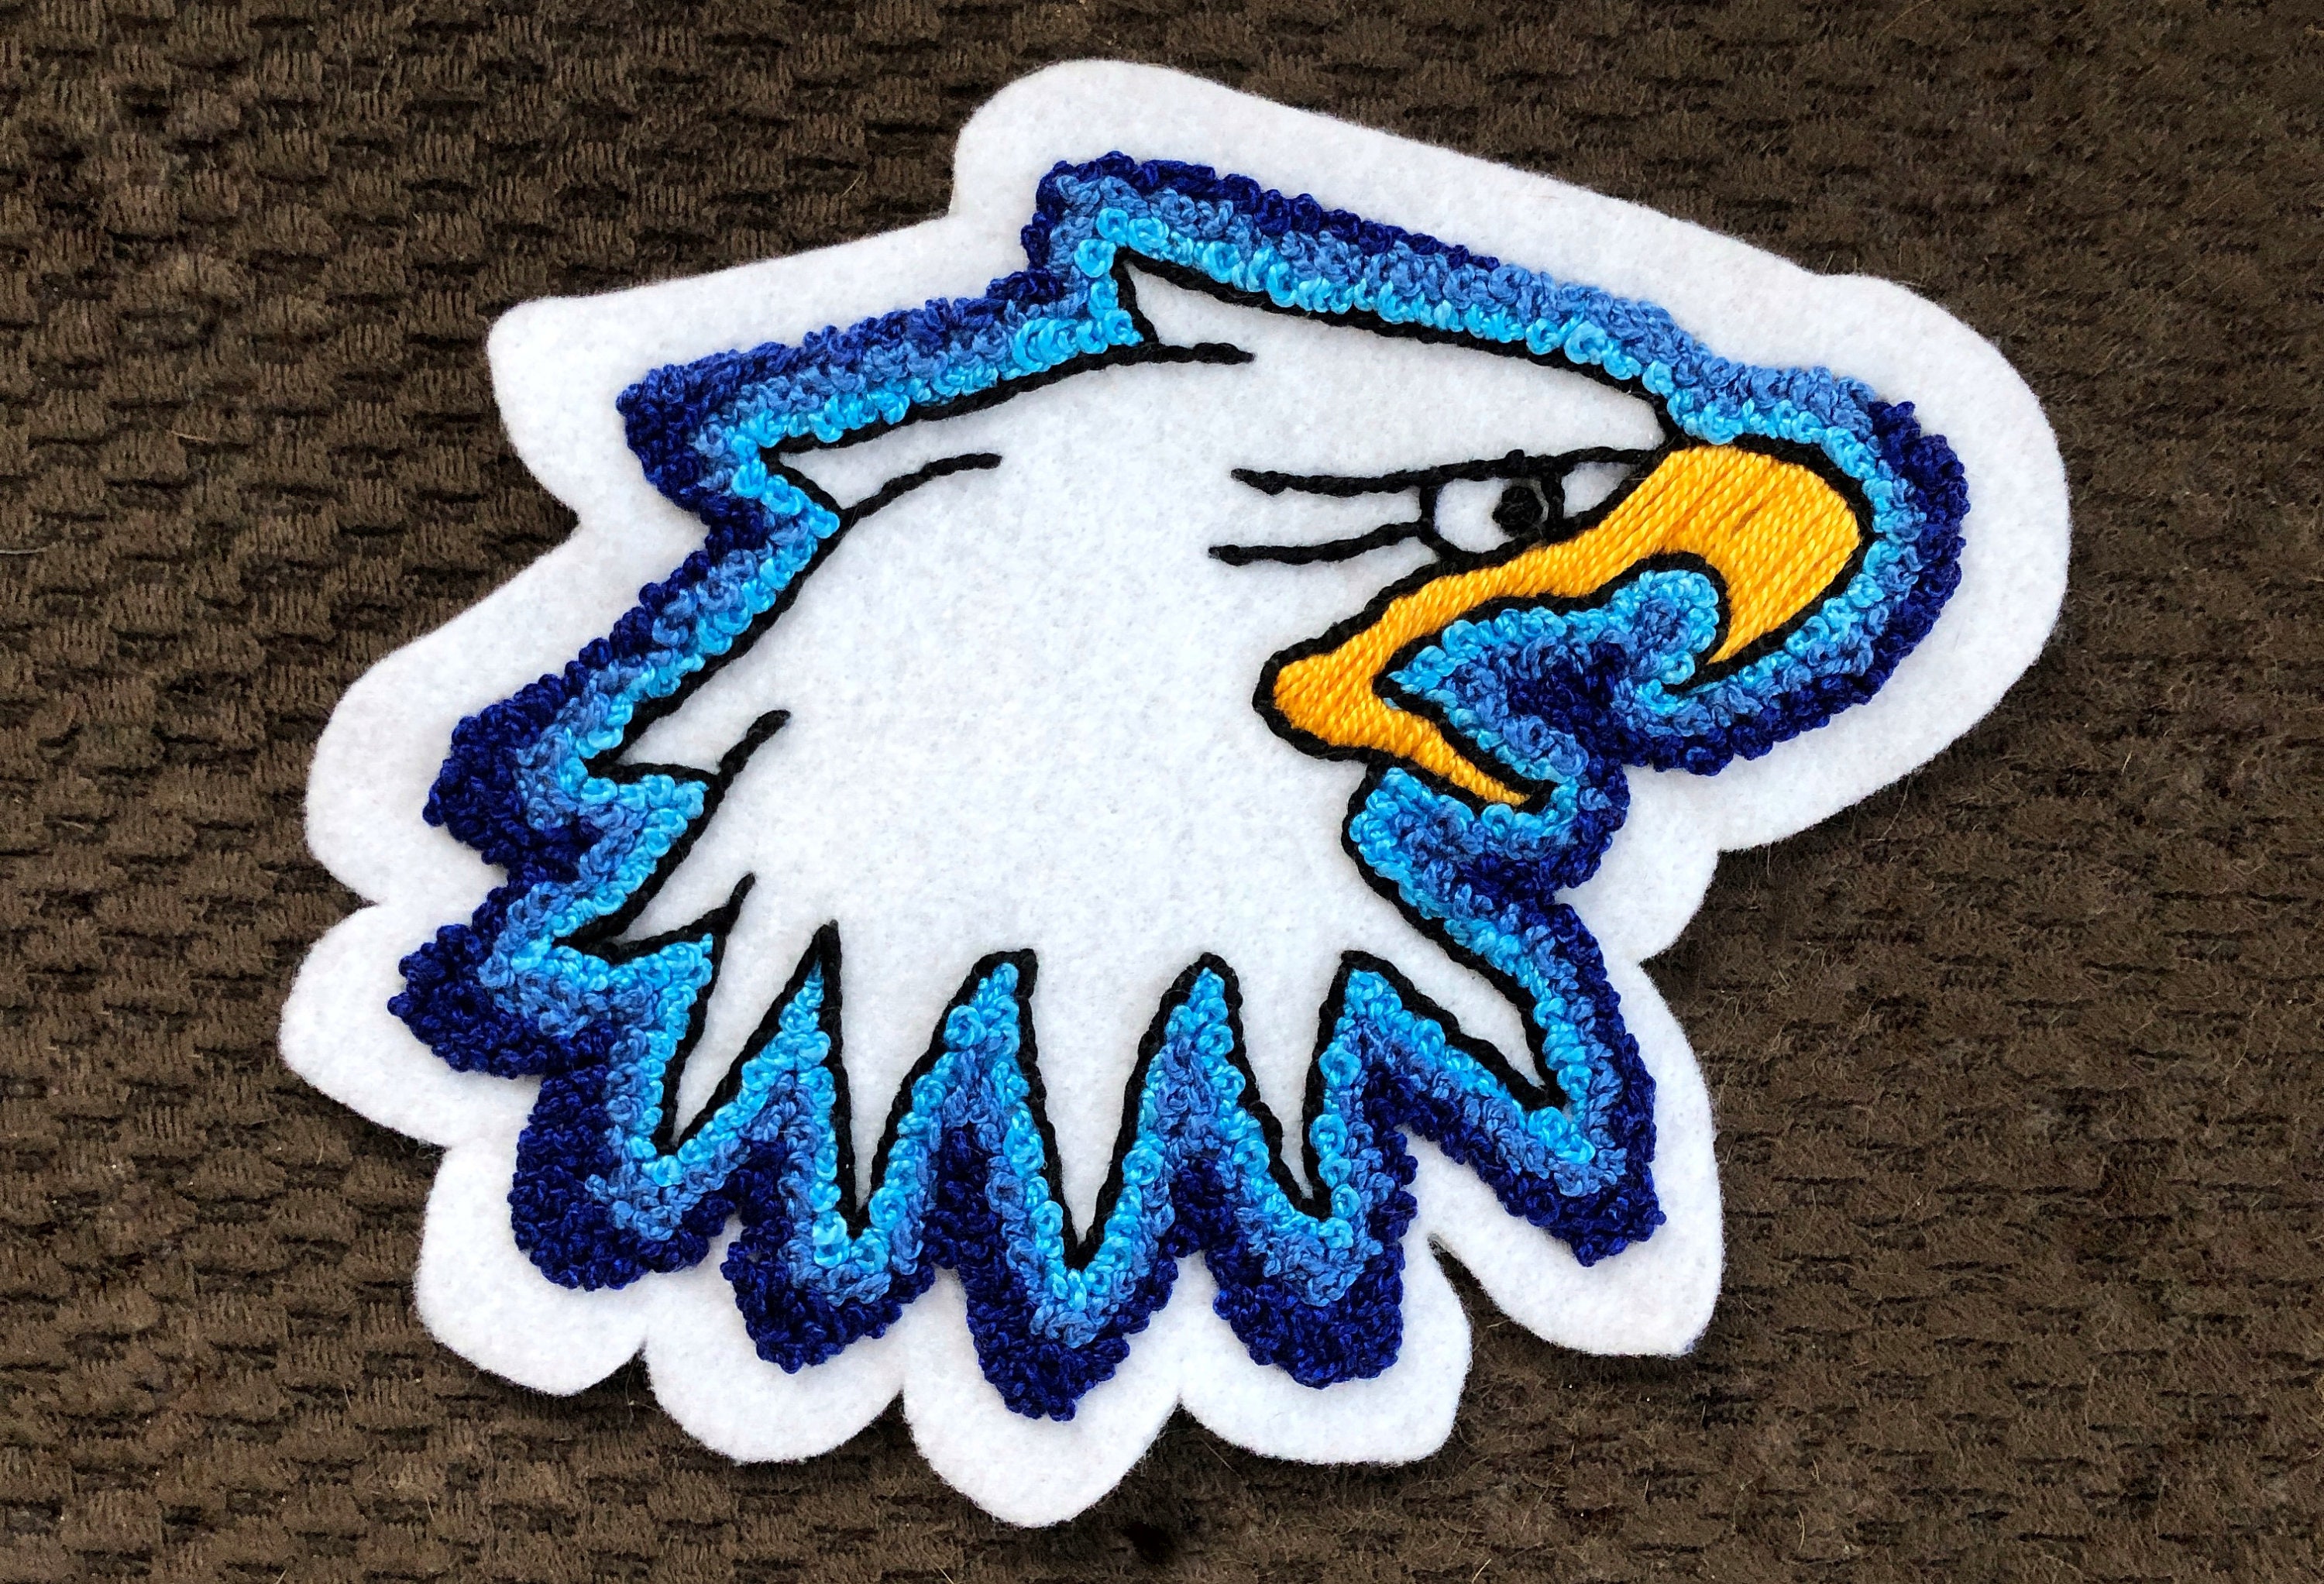 philadelphia eagles embroidered patches